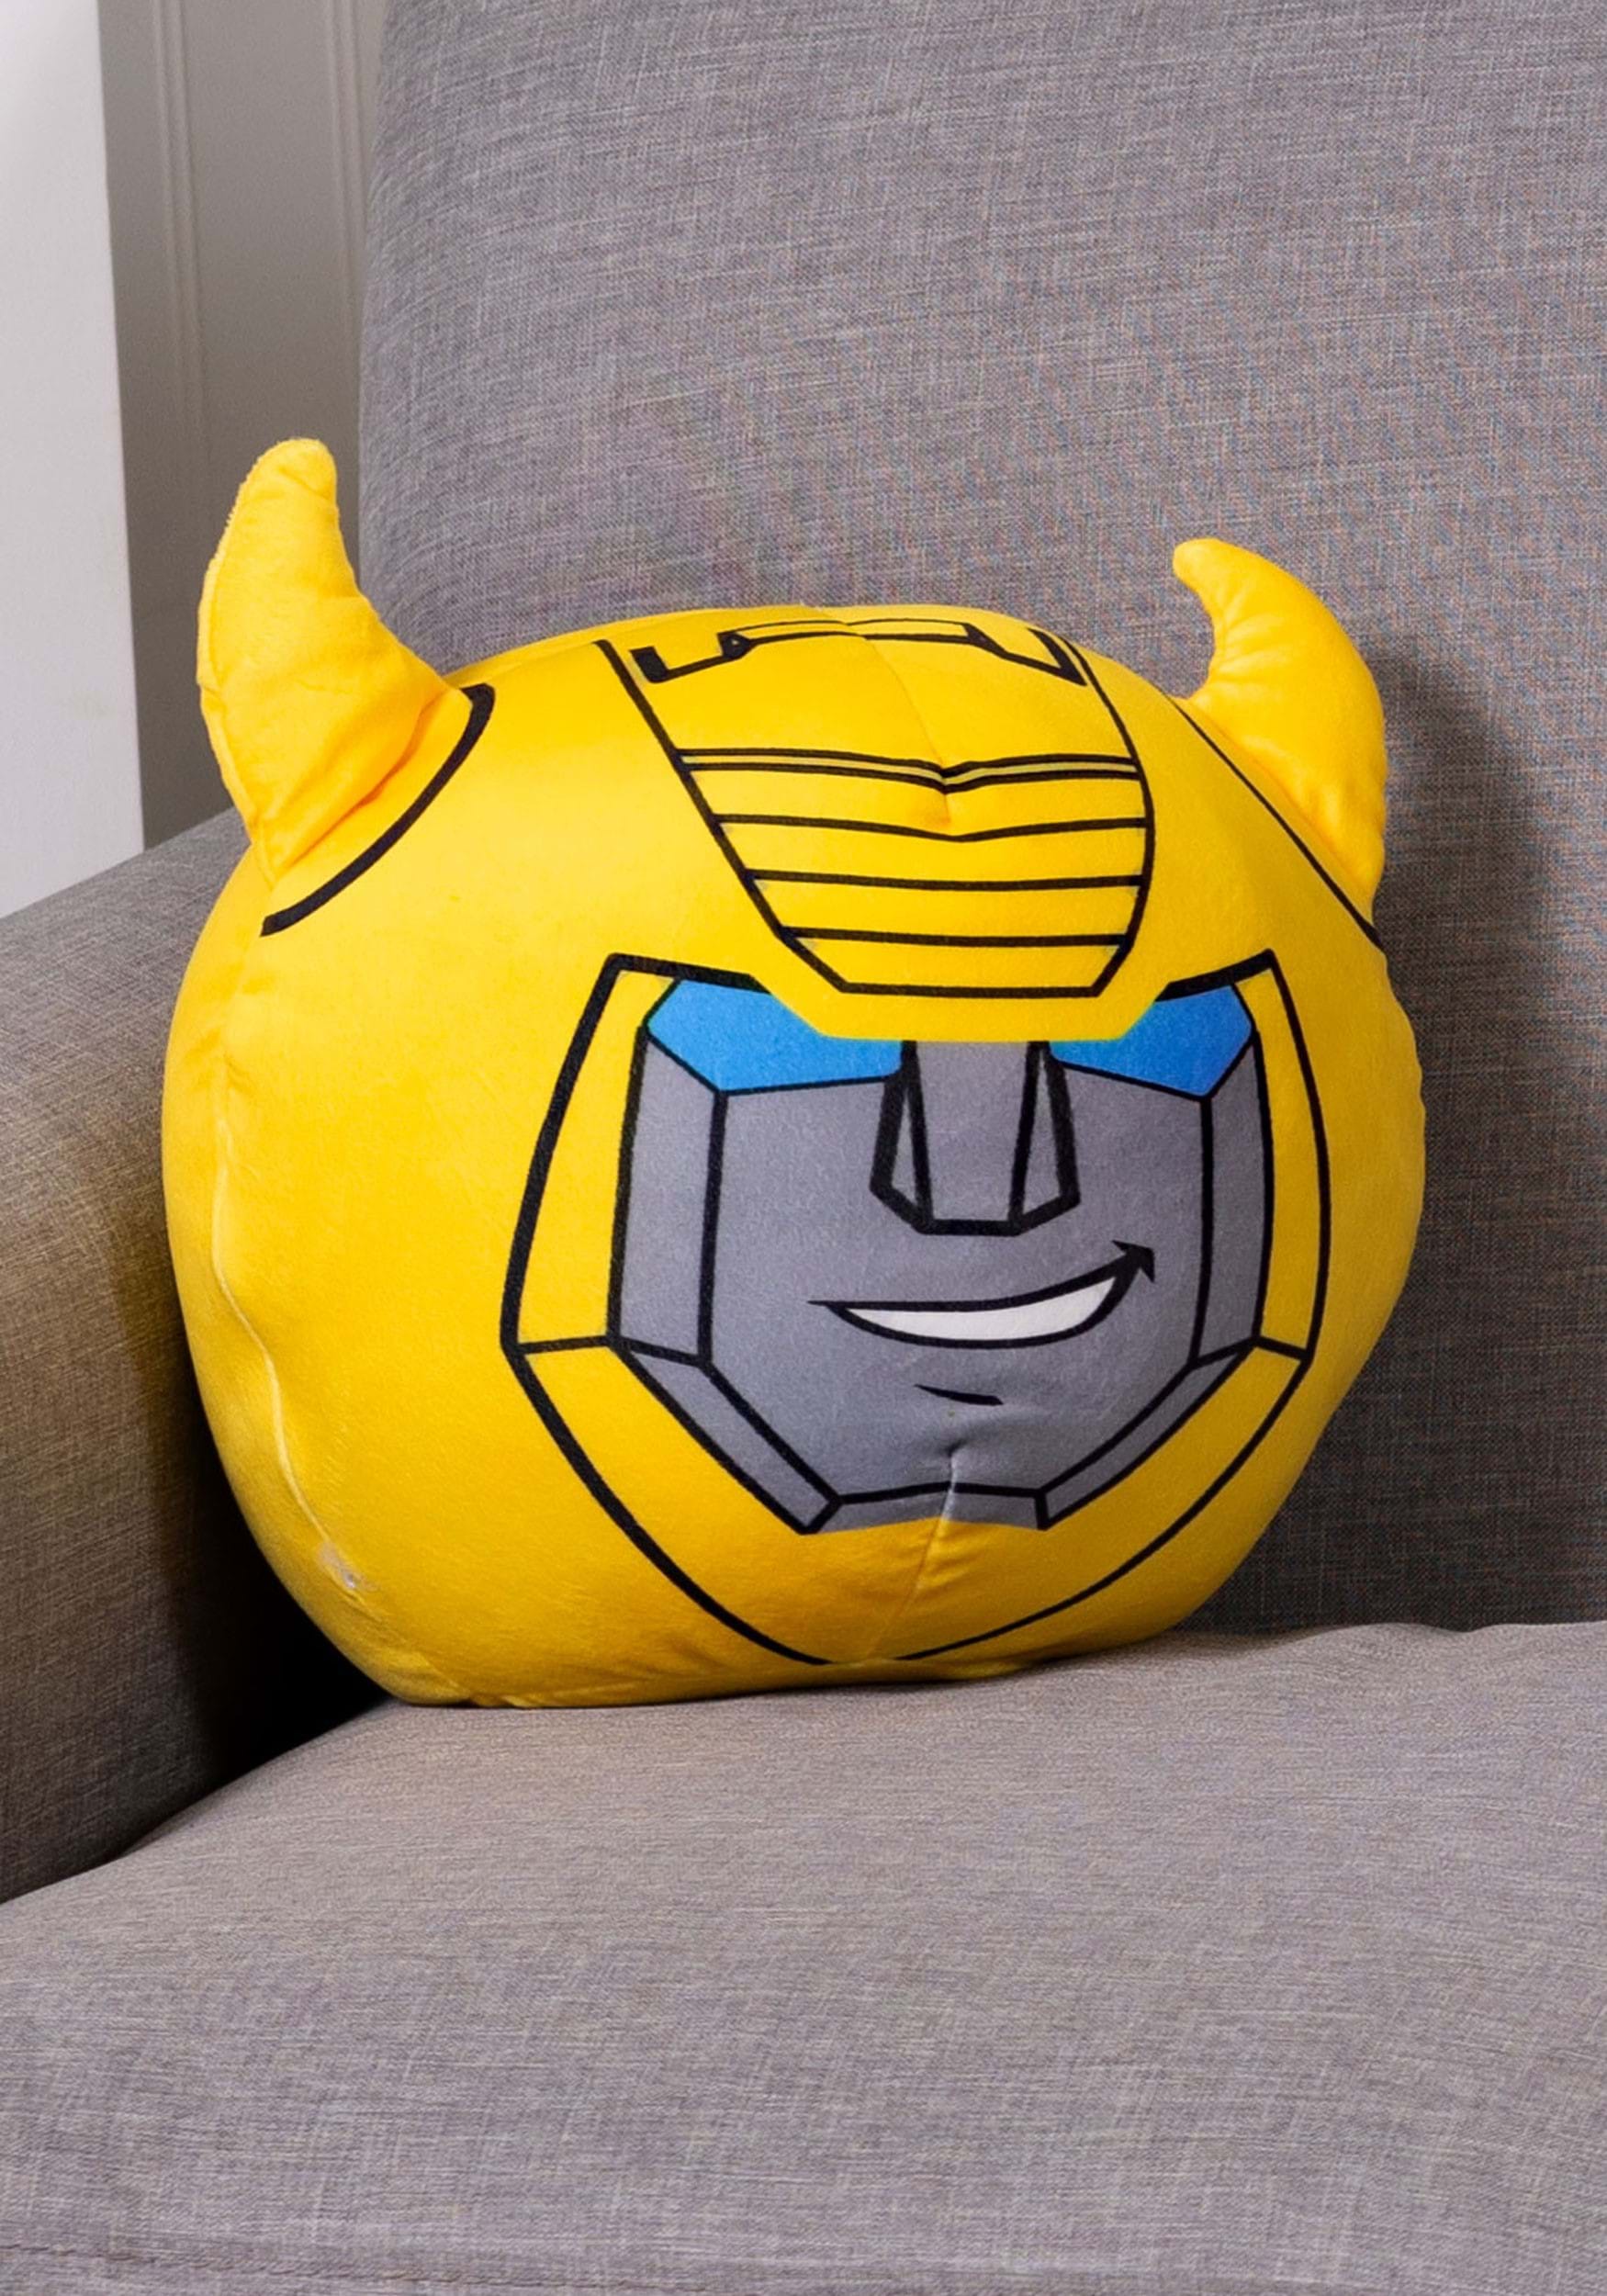 https://images.fun.com/products/86691/1-1/transformers-bumblebee-smile-cloud-pillow-update.jpg